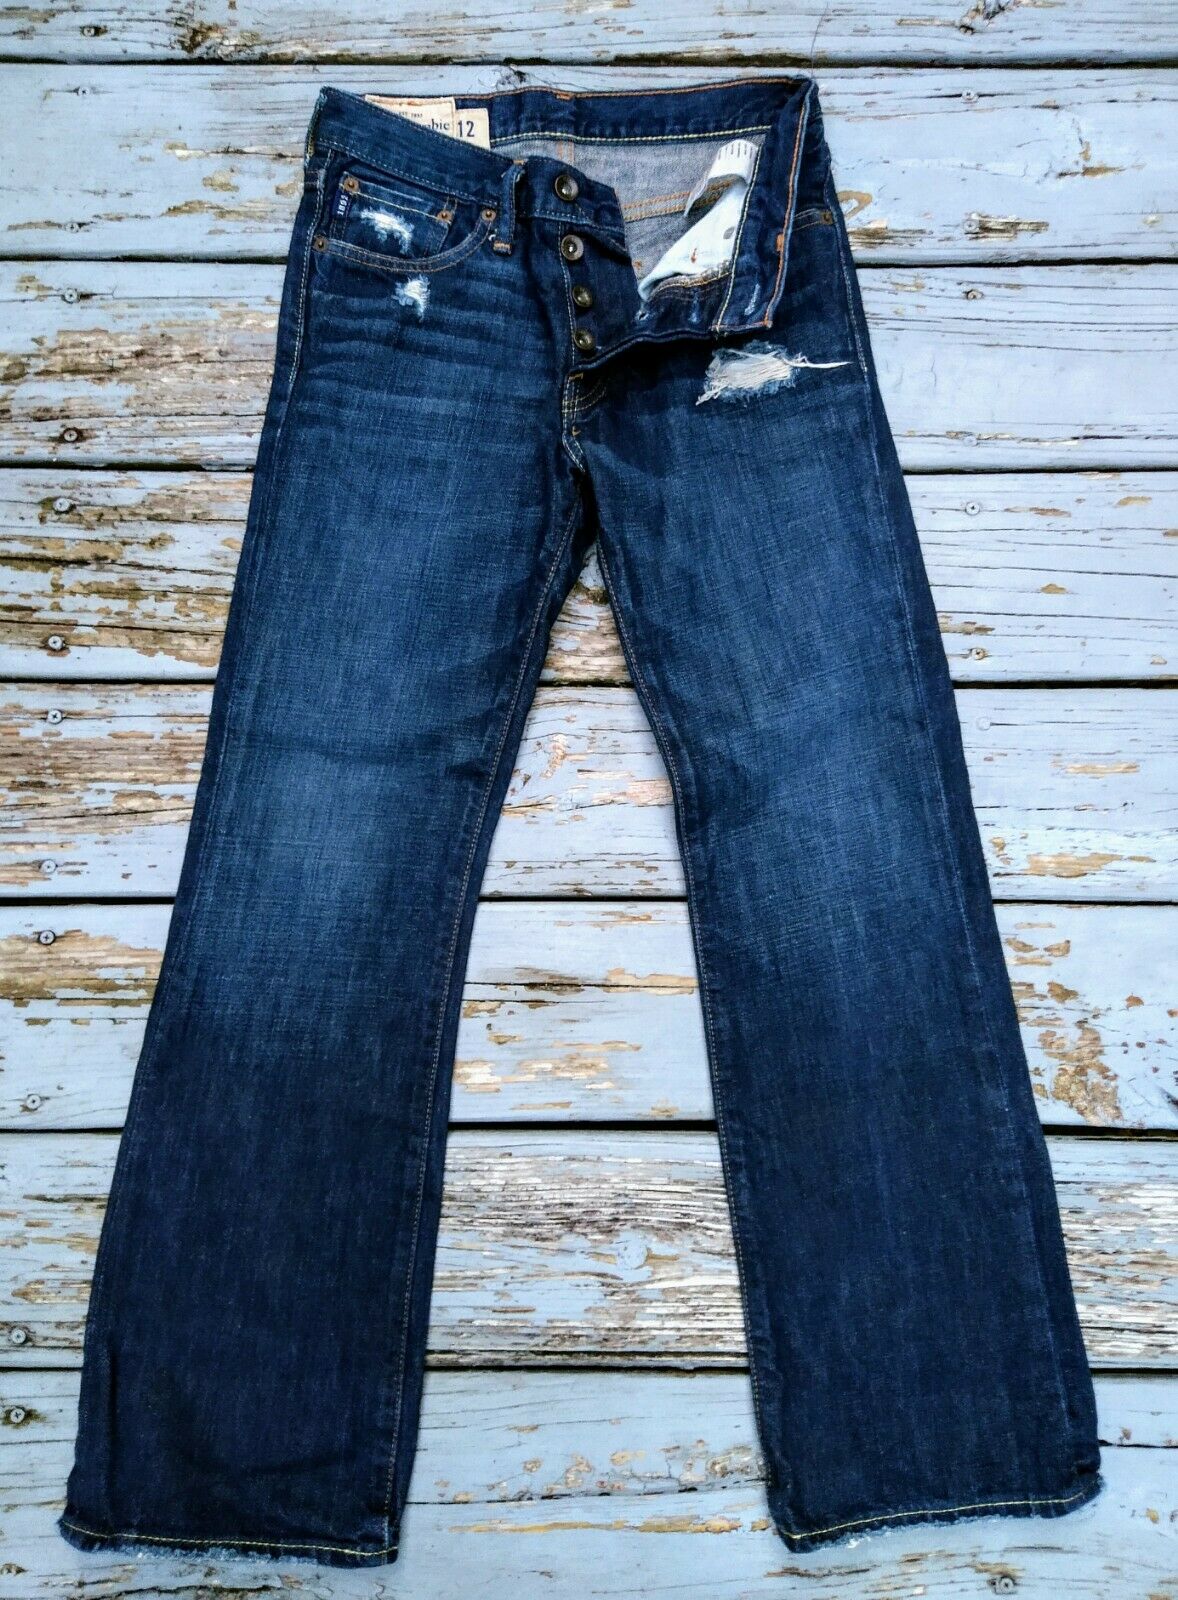 Abercrombie Baxter Slim Boot Jeans Low Rise Boys Size 12 Slim Button-fly